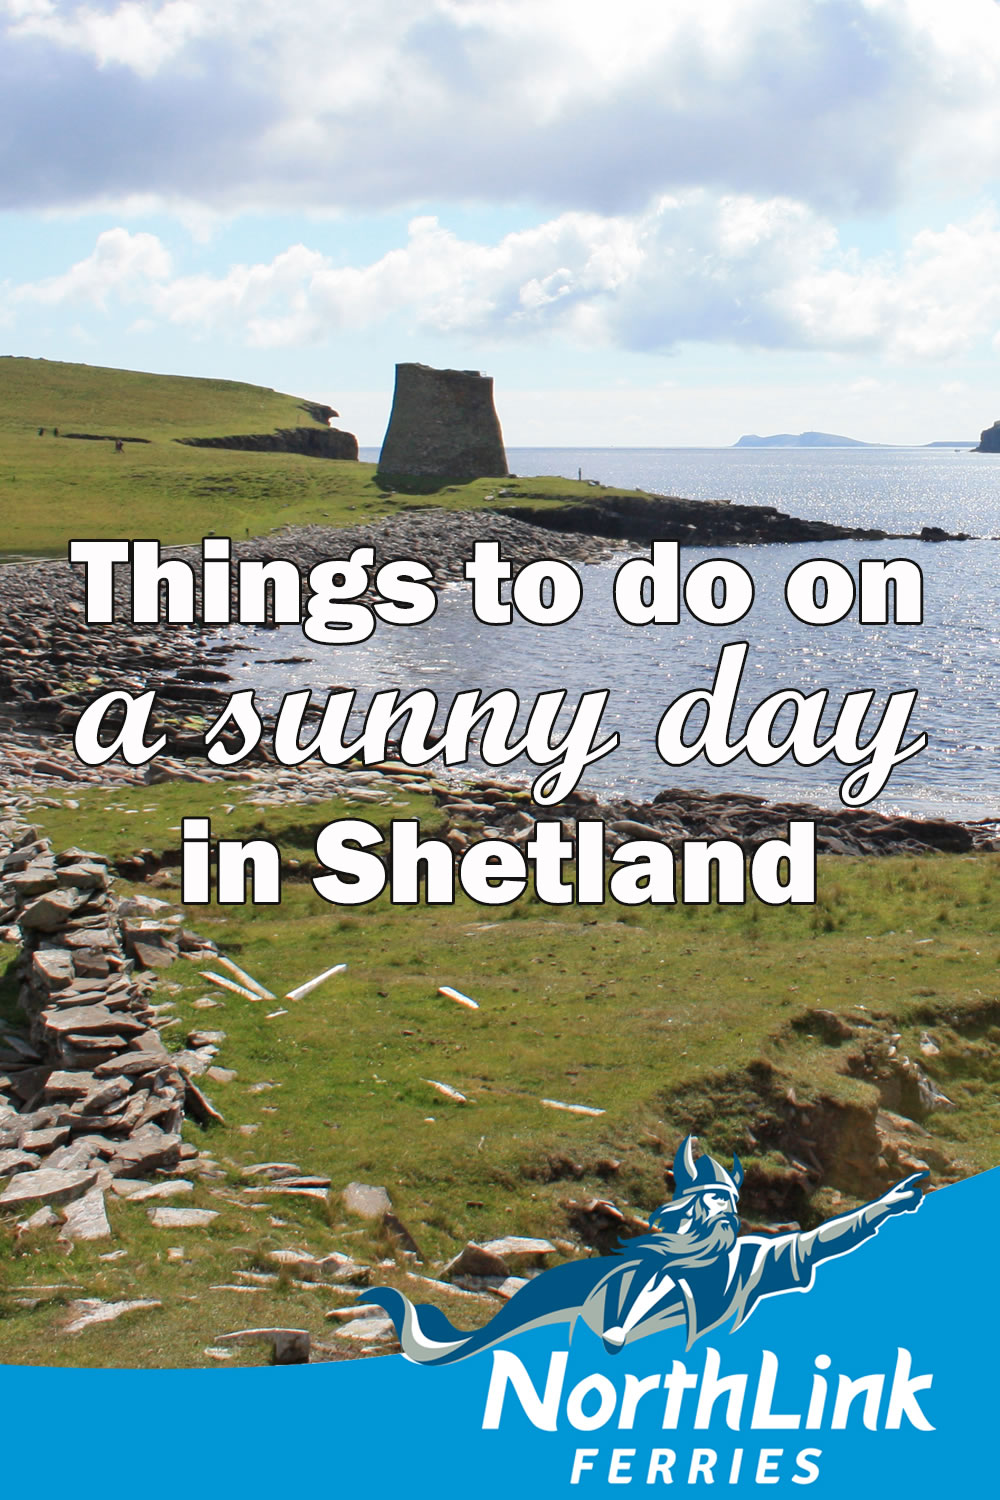 Things to do on a sunny day in Shetland